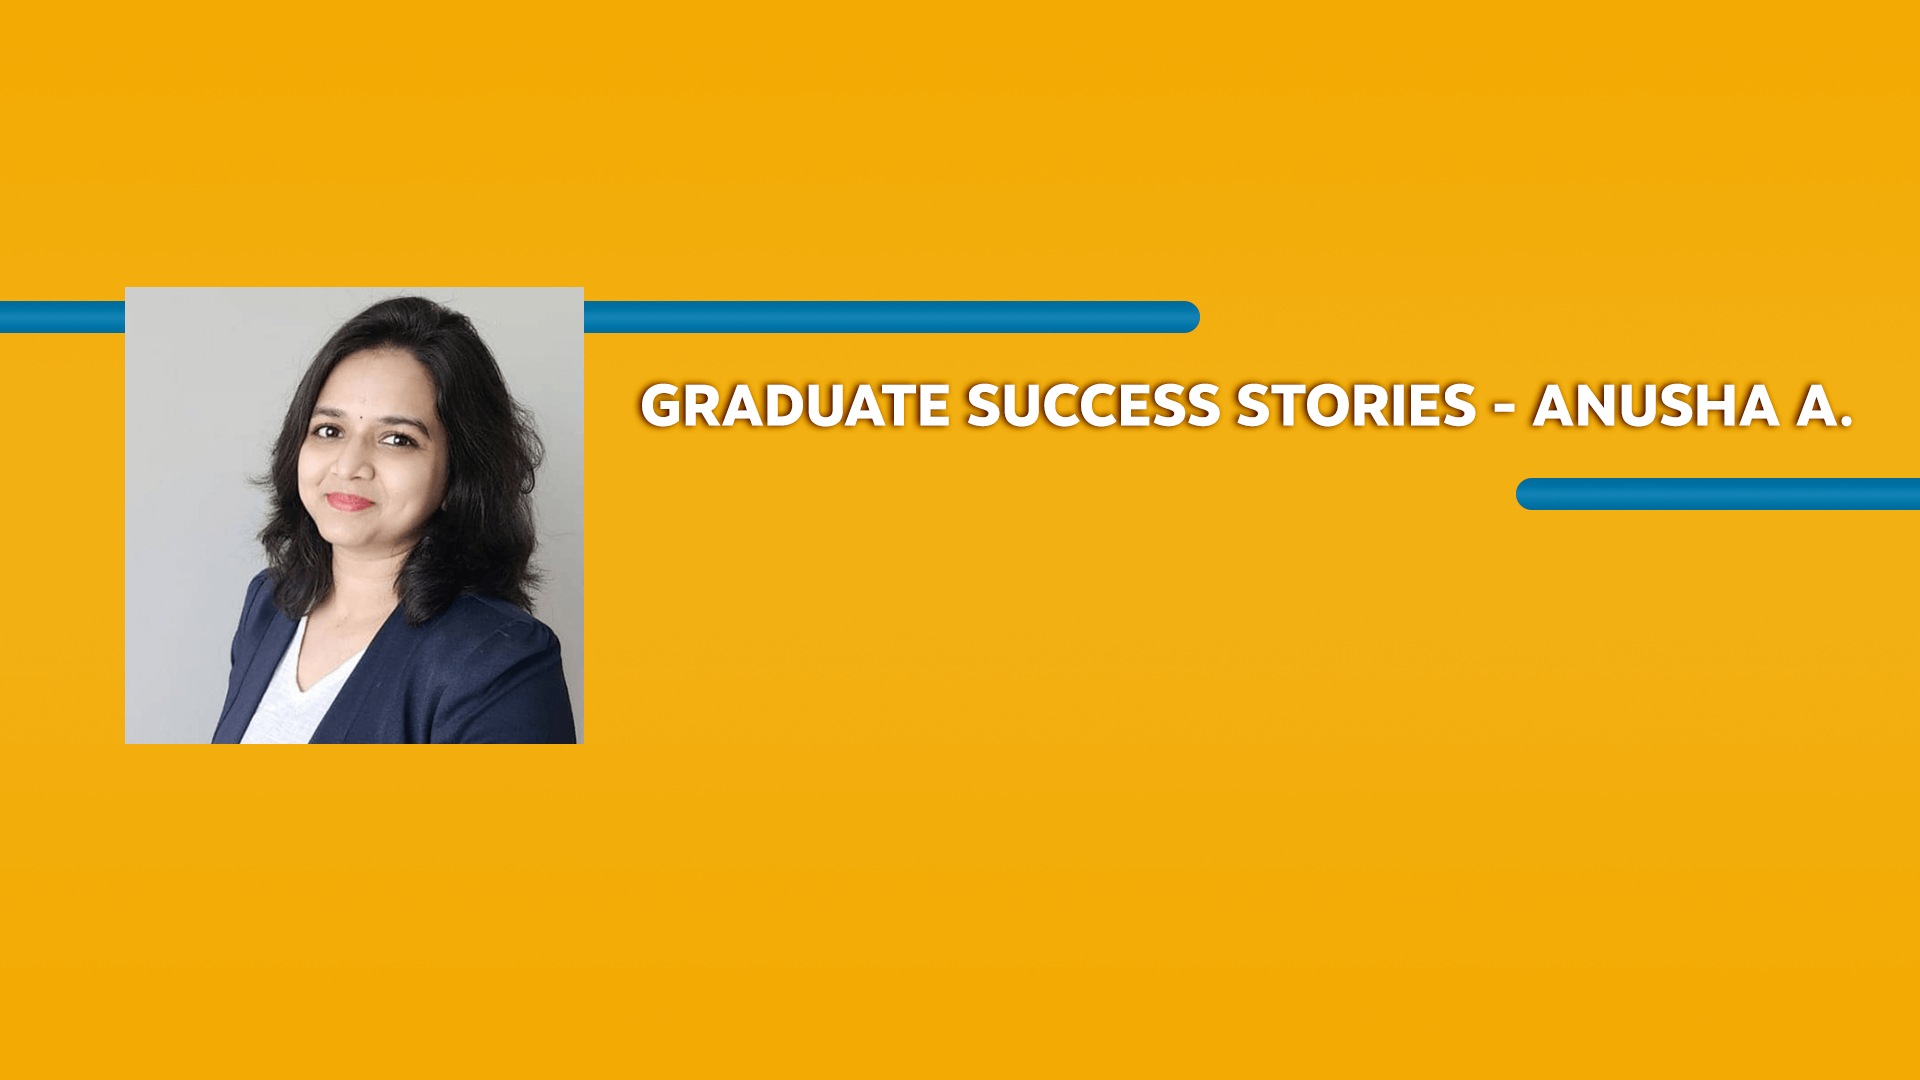 Orange rectangle with a picture of a woman wearing a blazer and Graduate Success Stories - Anusha A. text in white font